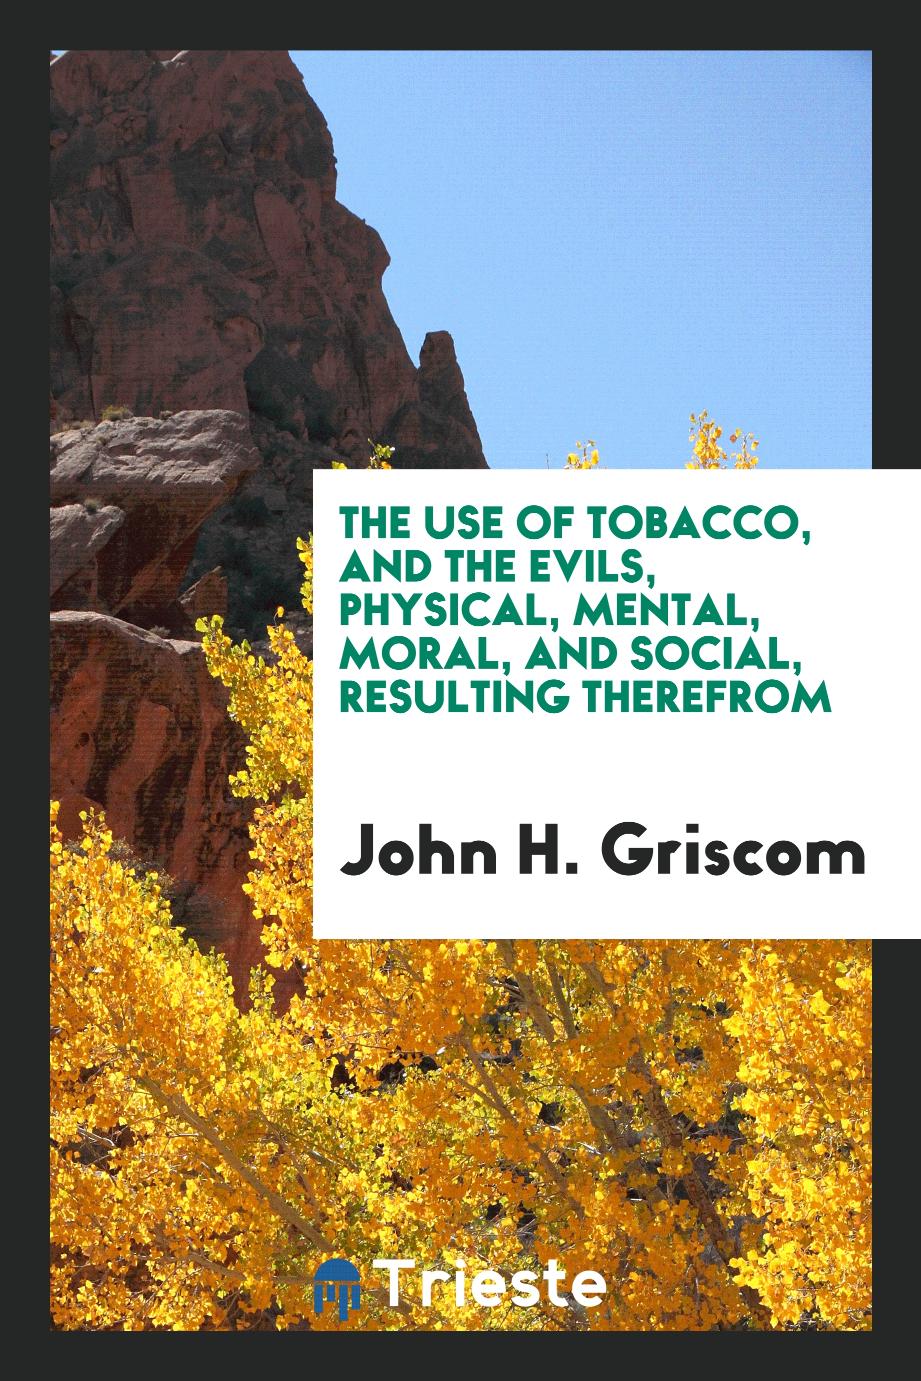 John H. Griscom - The Use of Tobacco, and the Evils, Physical, Mental, Moral, and Social, resulting therefrom